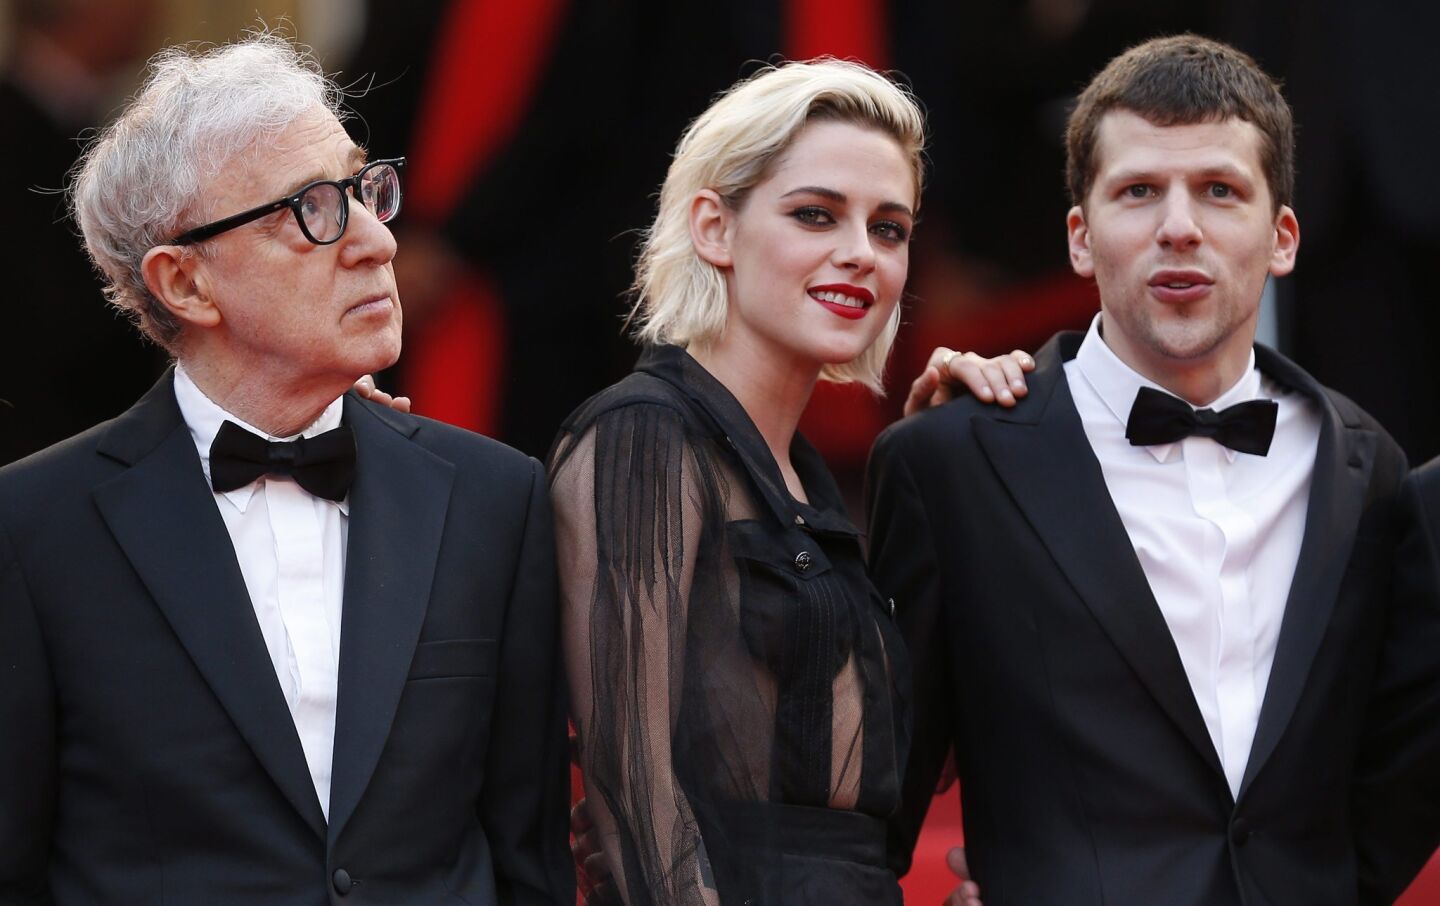 Cannes 2016 opening ceremony and 'Café Society' premiere